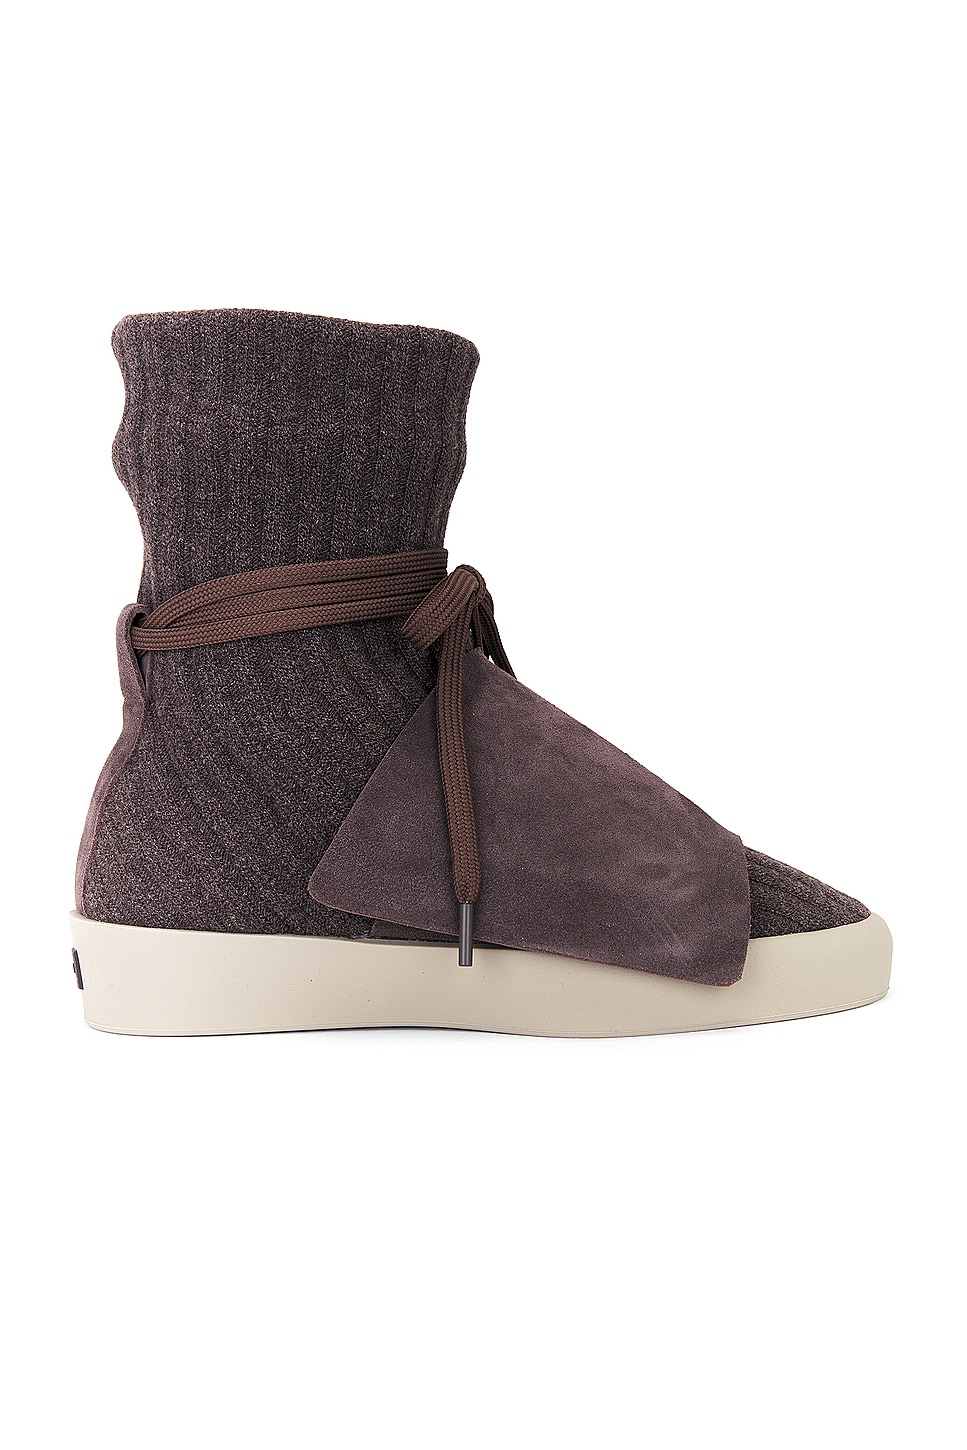 Image 1 of Fear of God Moc Knit Strap in Brown